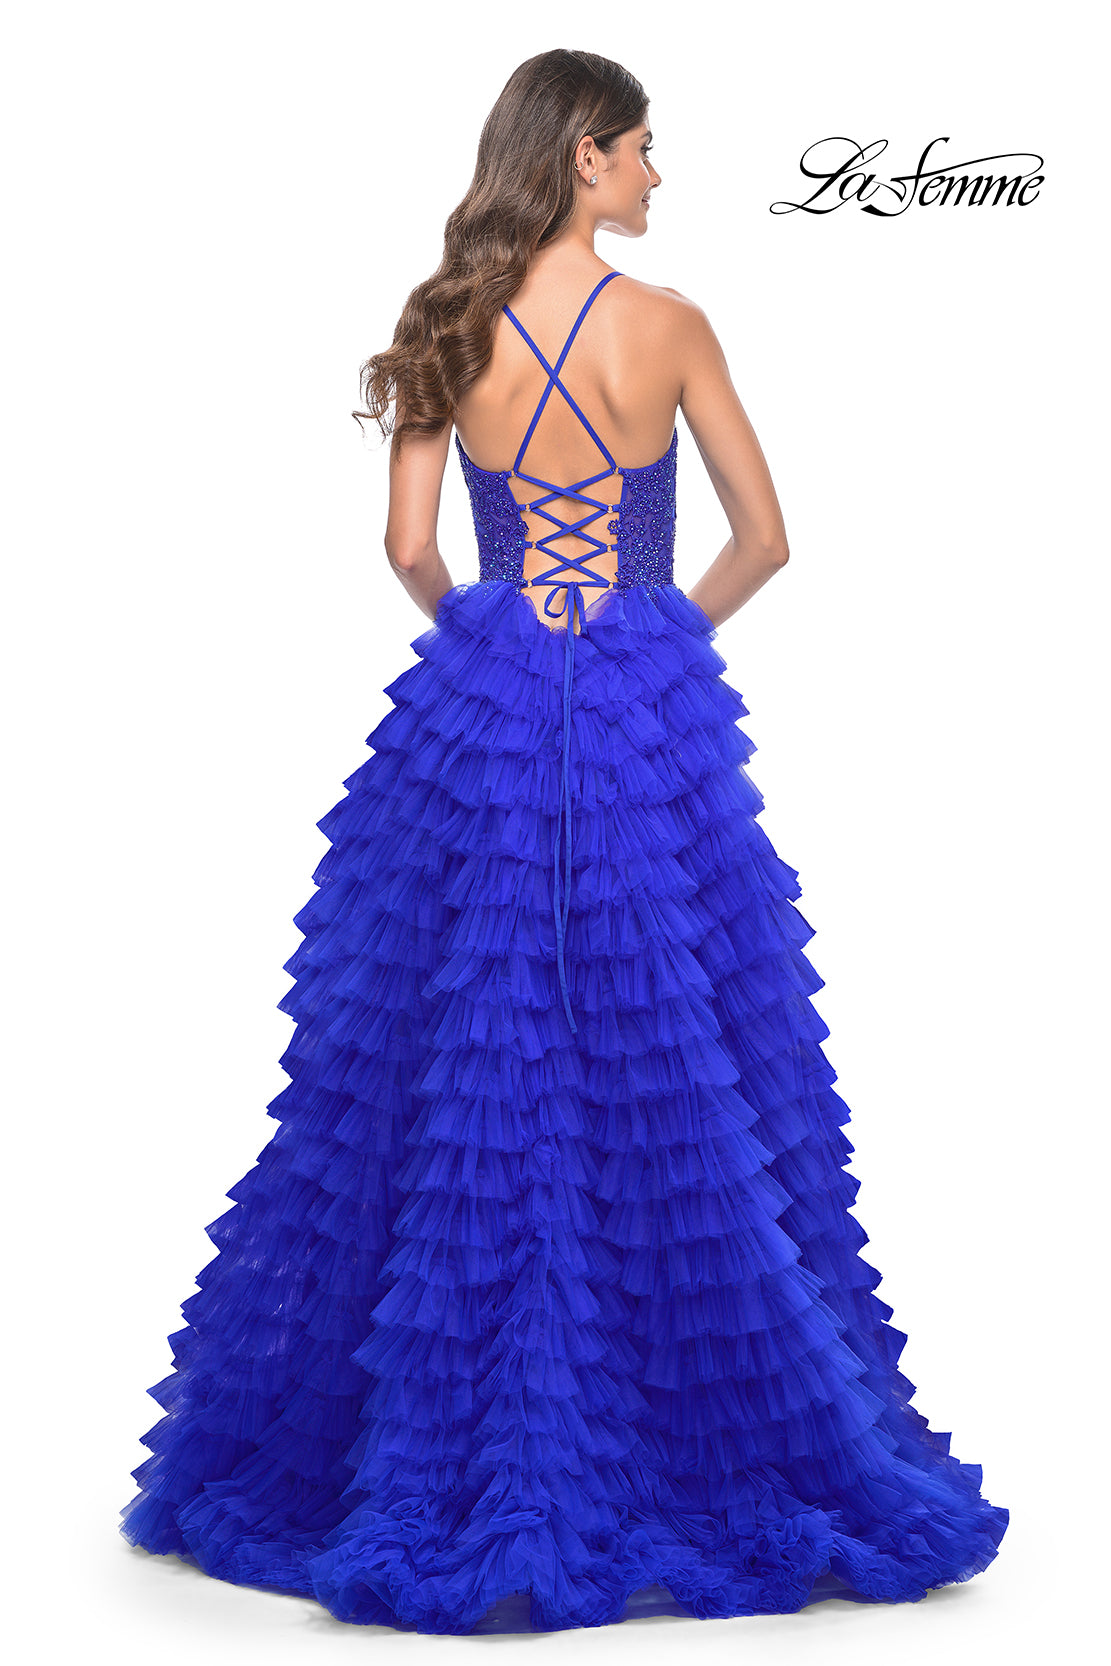 La Femme 32128 Dreamy Ruffle Tulle Tiered Prom Dress - A captivating prom dress featuring a dreamy ruffle tulle tiered skirt, high slit, and intricate lace applique details for an enchanting and sophisticated look.  The model is wearing royal blue.